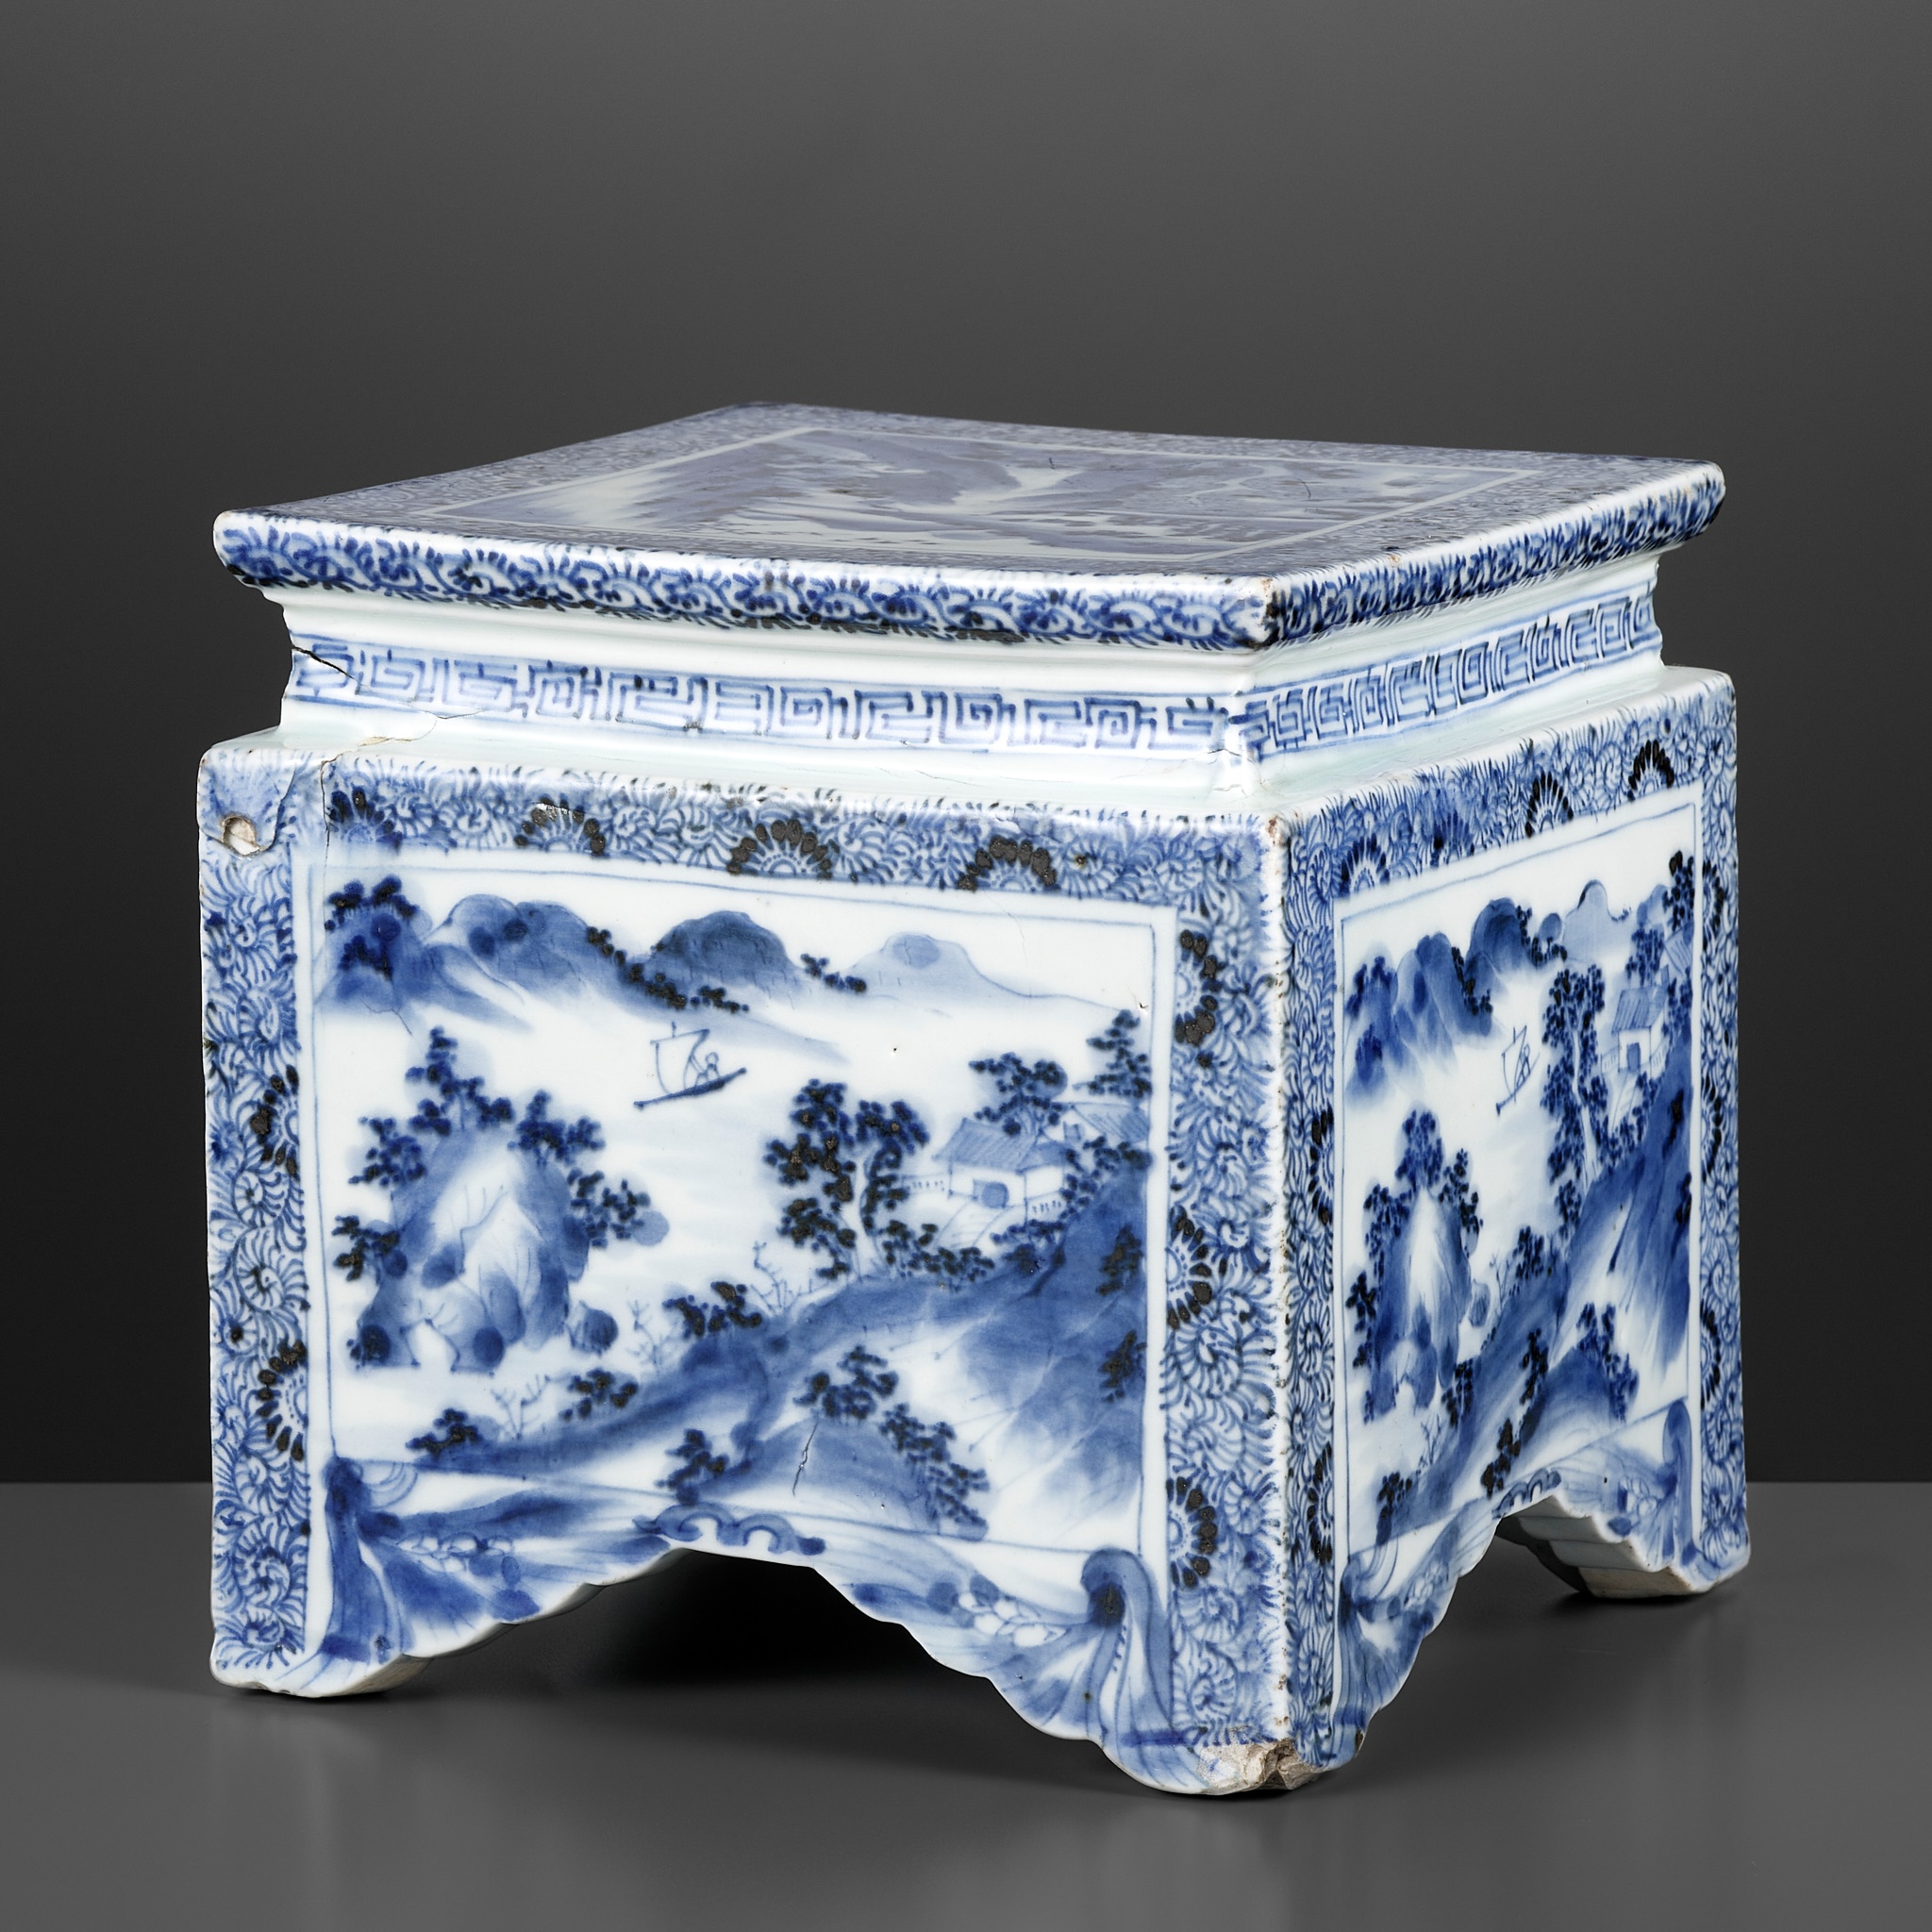 A MASSIVE BLUE AND WHITE 'LANDSCAPE' STAND, LATE MING TO EARLY QING DYNASTY